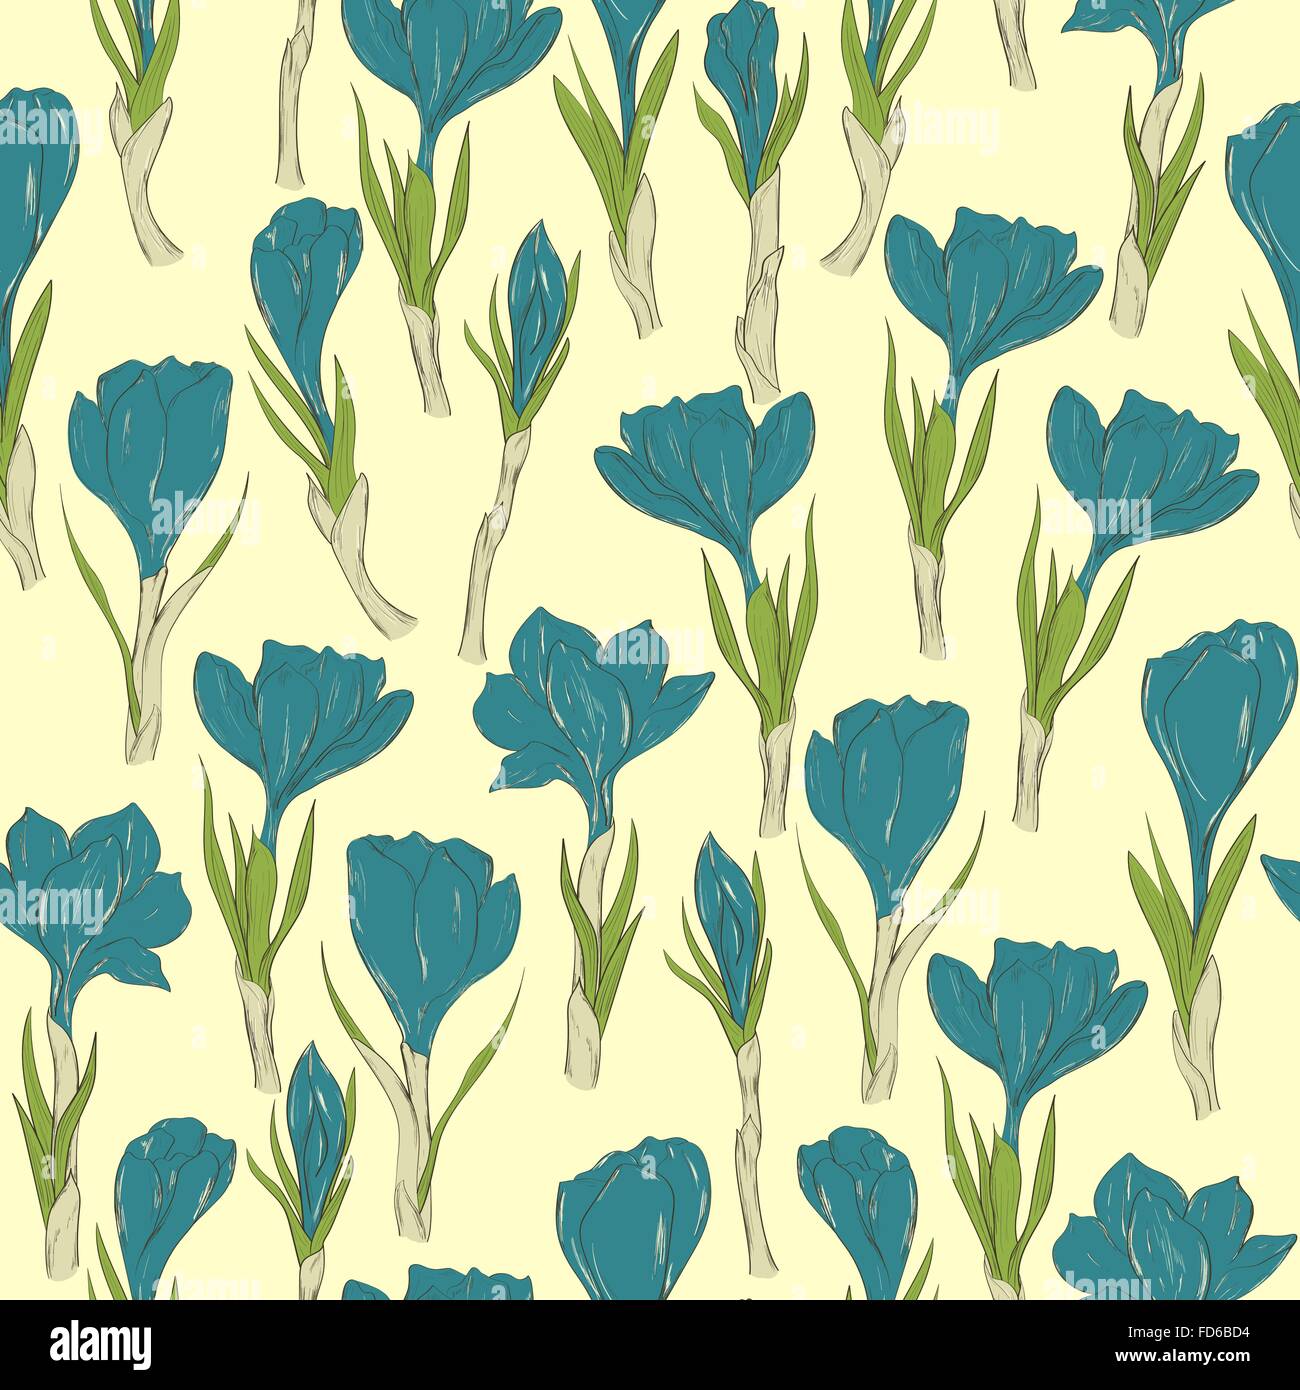 Seamless pattrn with hand drawn spring crocus flowers. Vector illustration Stock Vector